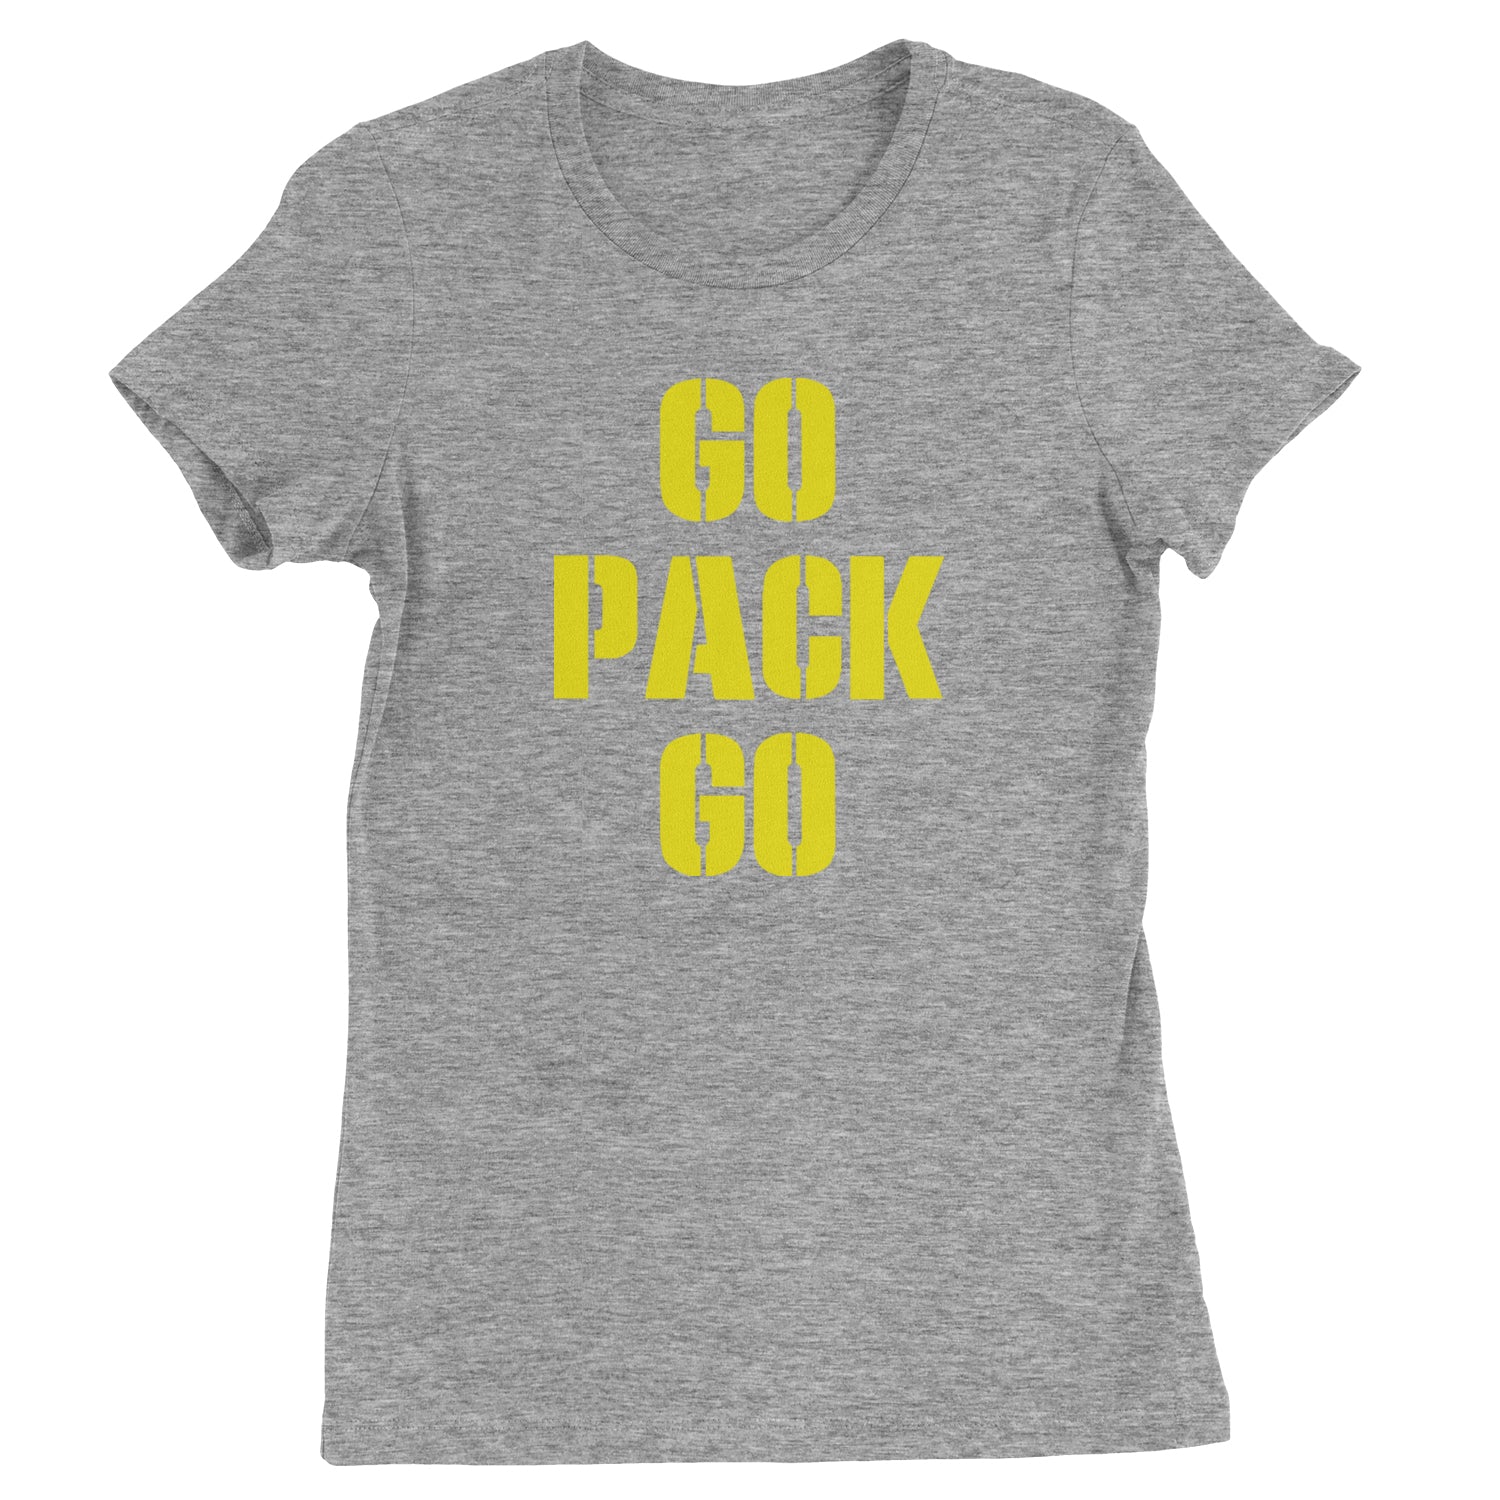 Go Pack Go Green Bay Womens T-shirt football, greenbay, packer by Expression Tees